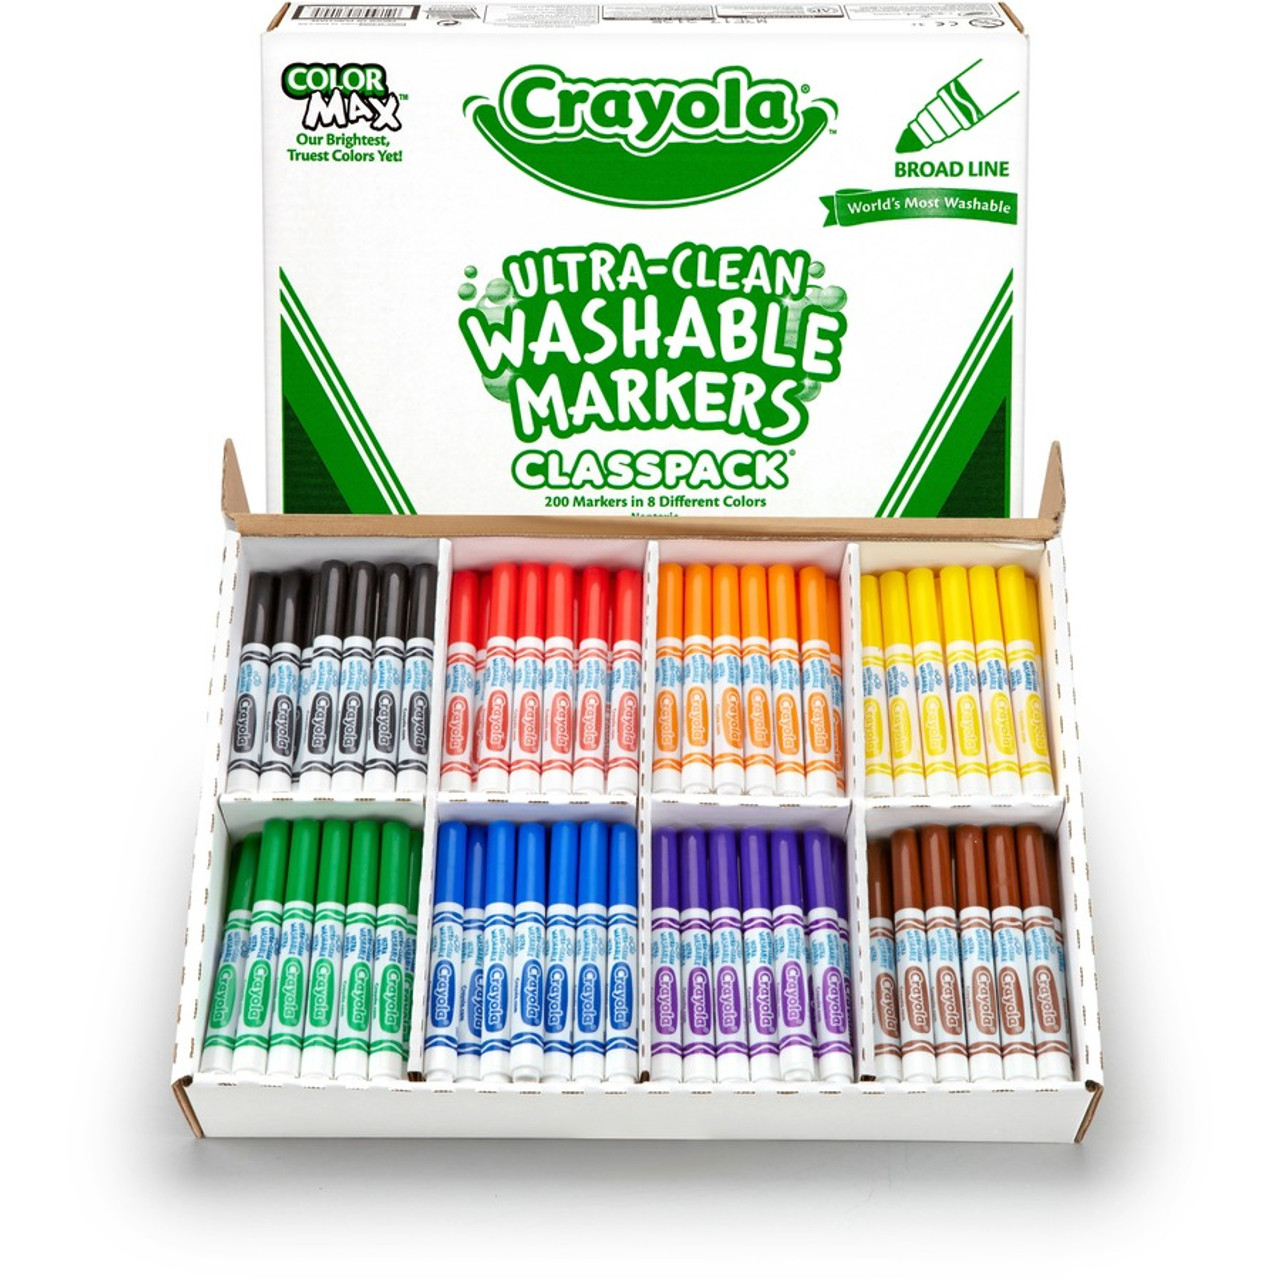 Crayola Washable Markers, Assorted Colors - 12 markers